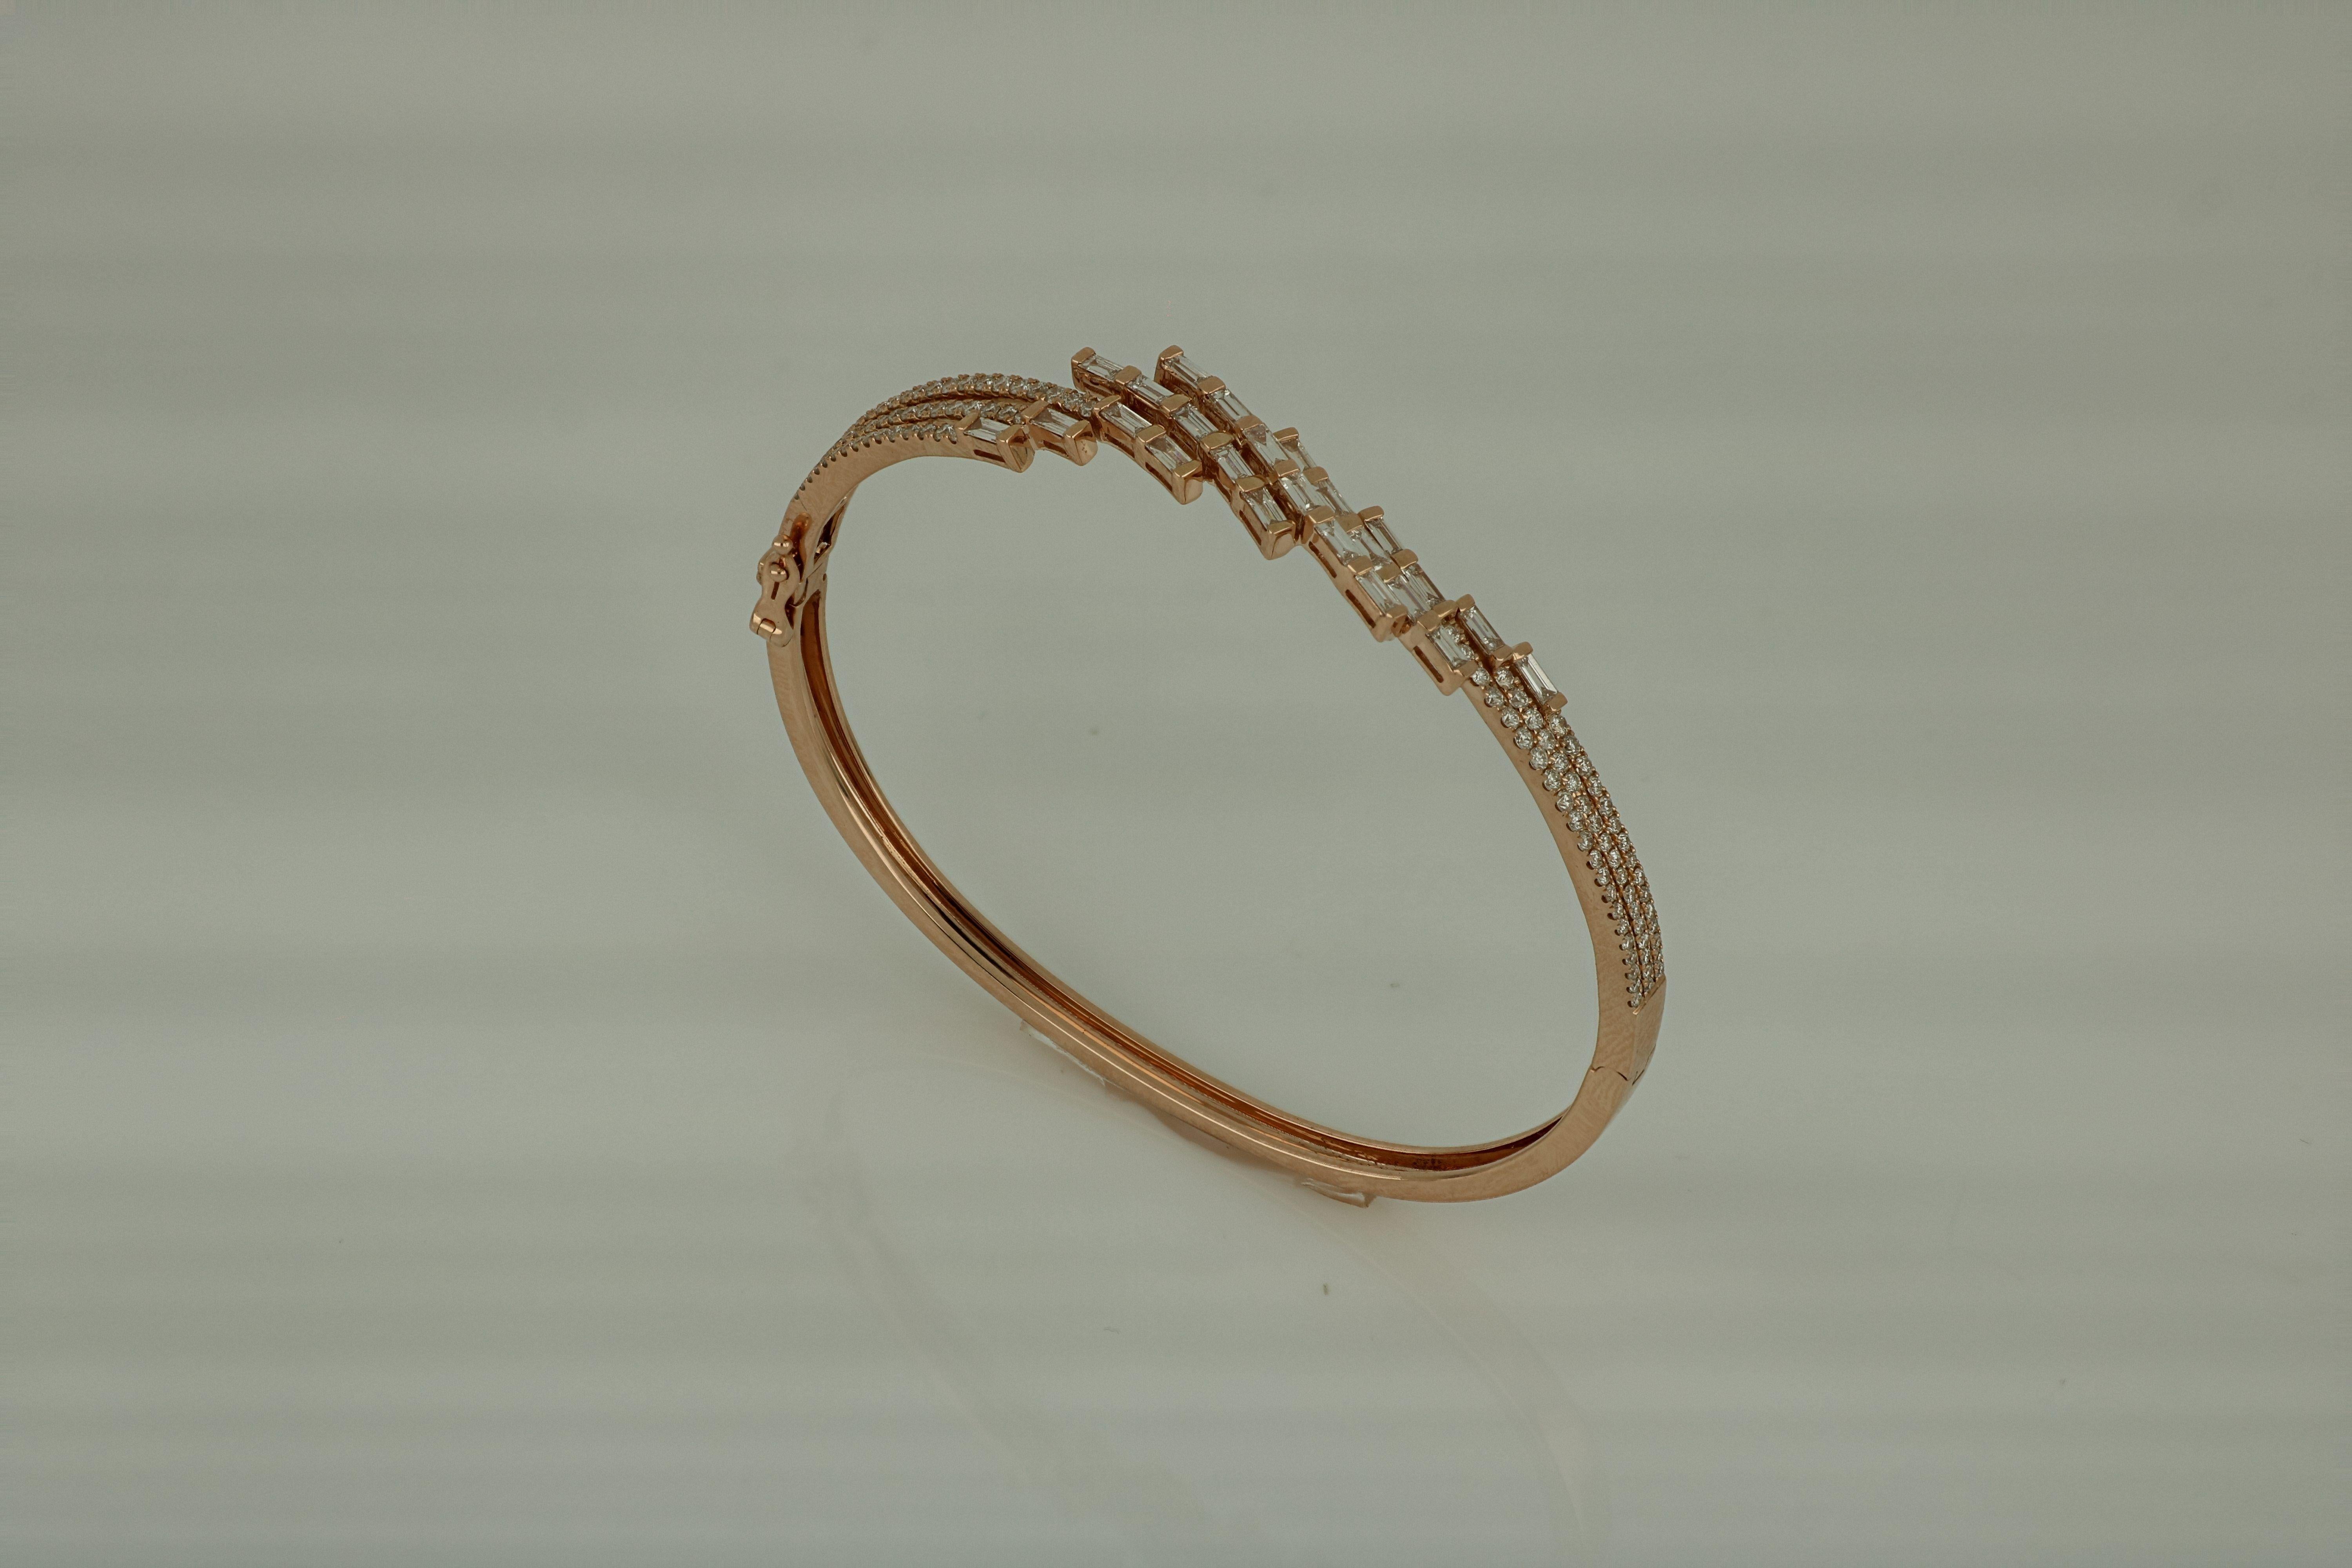 Emerald cut Diamonds, seemingly set at random angles to form an artfully abstract web of stones in this 18 Karat rose gold bangle .
Diamonds (Total Carat Weight:  1.68 CT )
Diamond clarity: VS . SI / H Color
18 Karat gold ( total weight of gold :